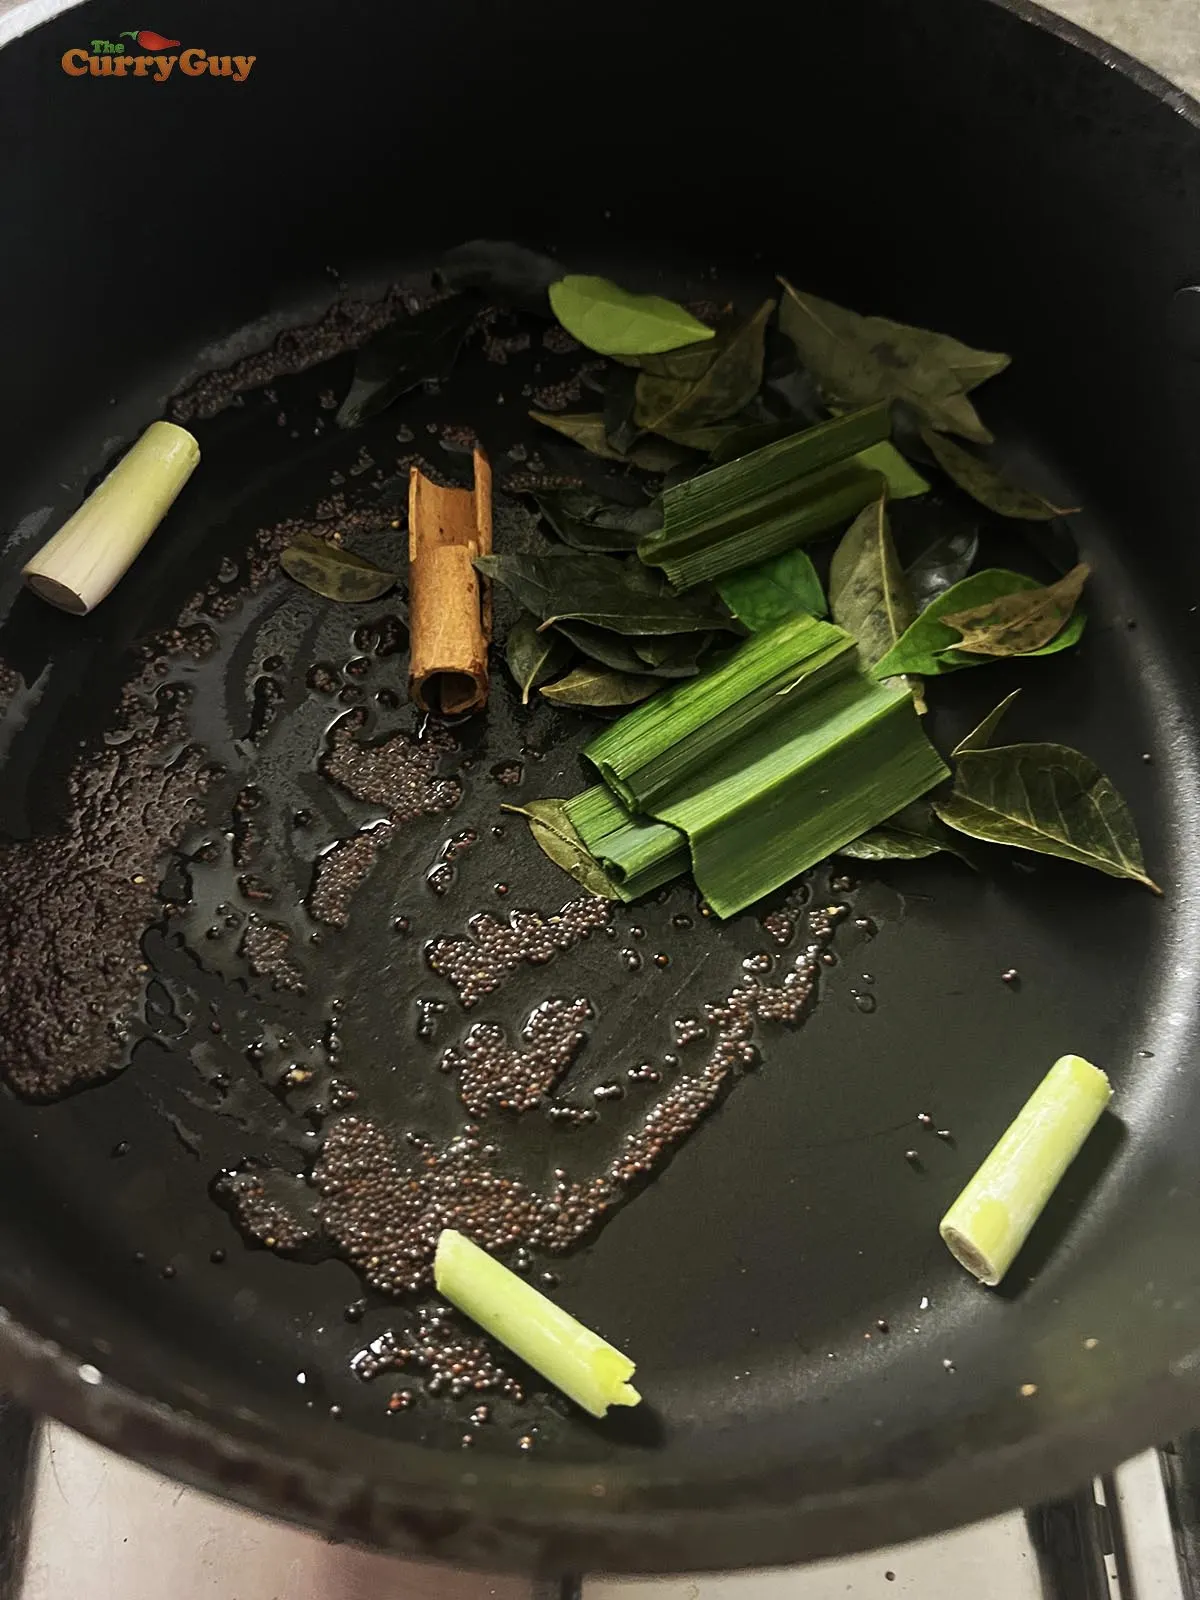 Infusing herbs and spices into hot oil.